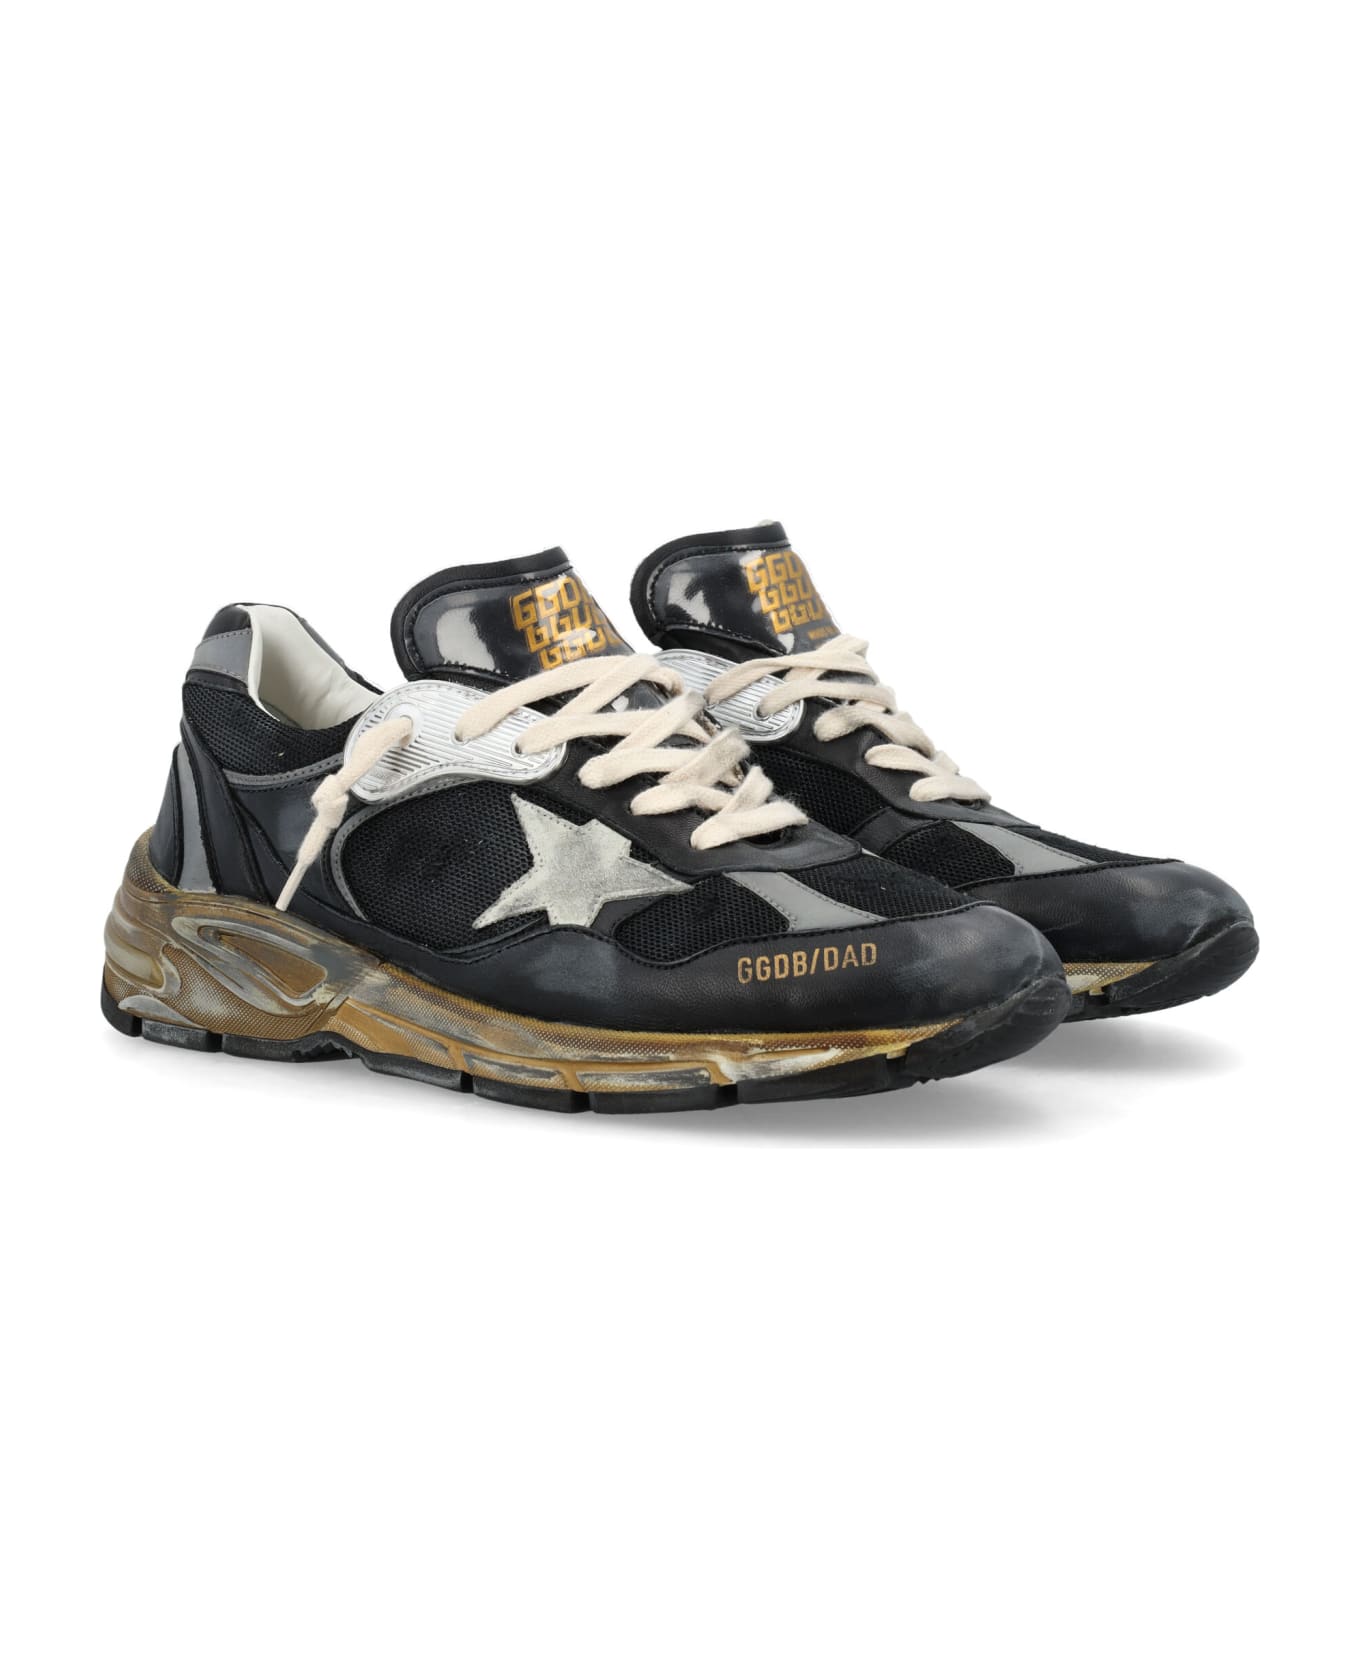 Golden Goose Dad-star Sneakers - Black/Silver/Ice